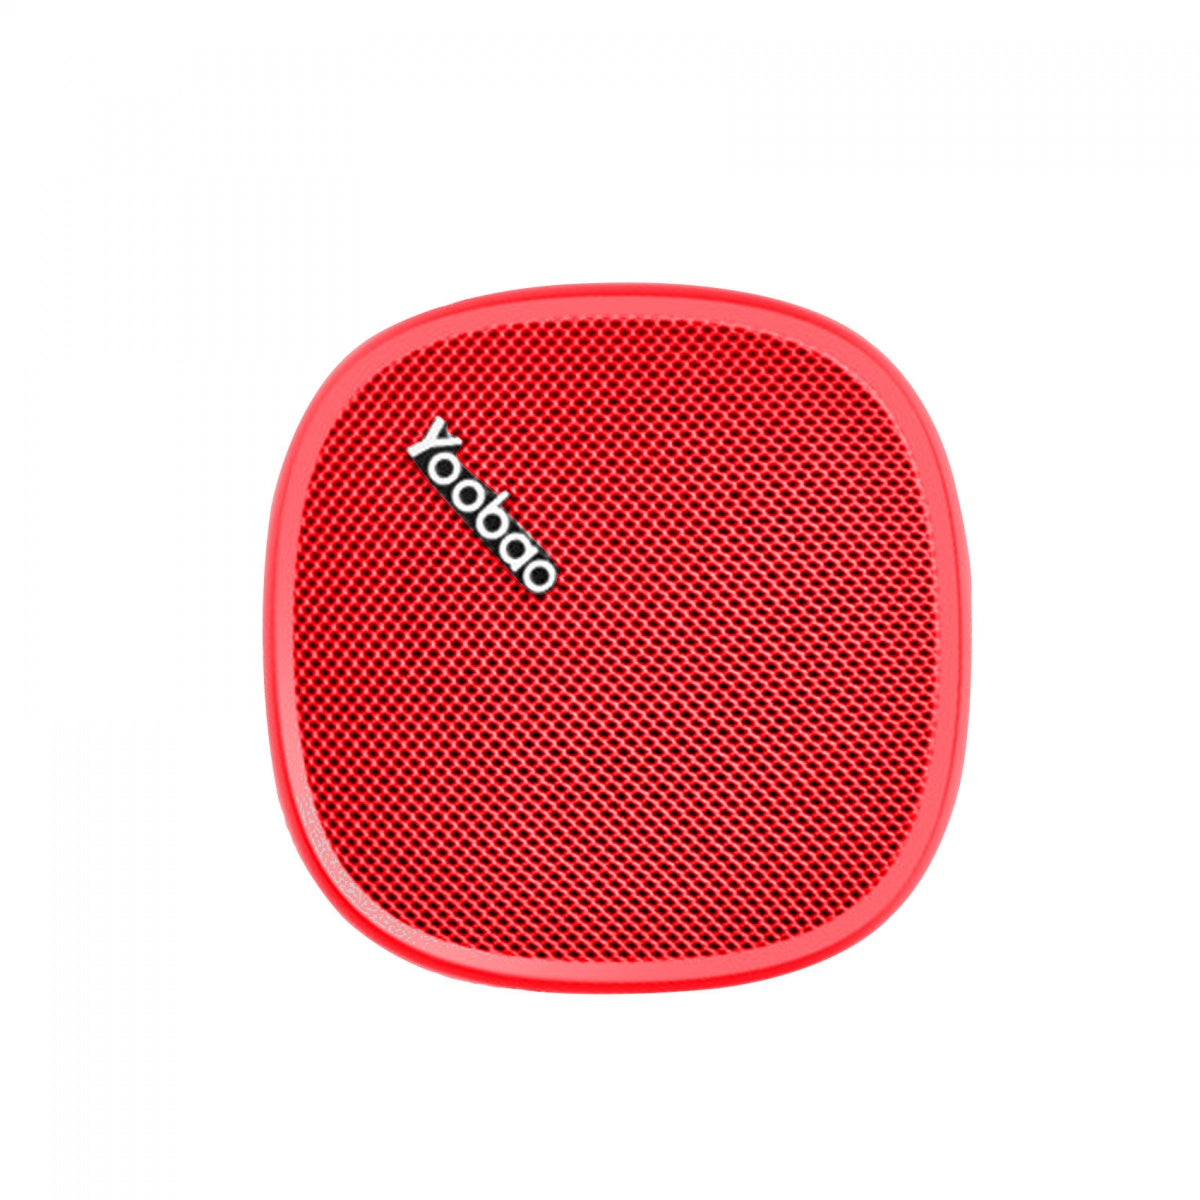 Yoobao M1 2000mAh Portable Bluetooth 4.2 Speaker Rechargeable with Up to 12 Hours Playtime (Black, Blue, Pink, Red)